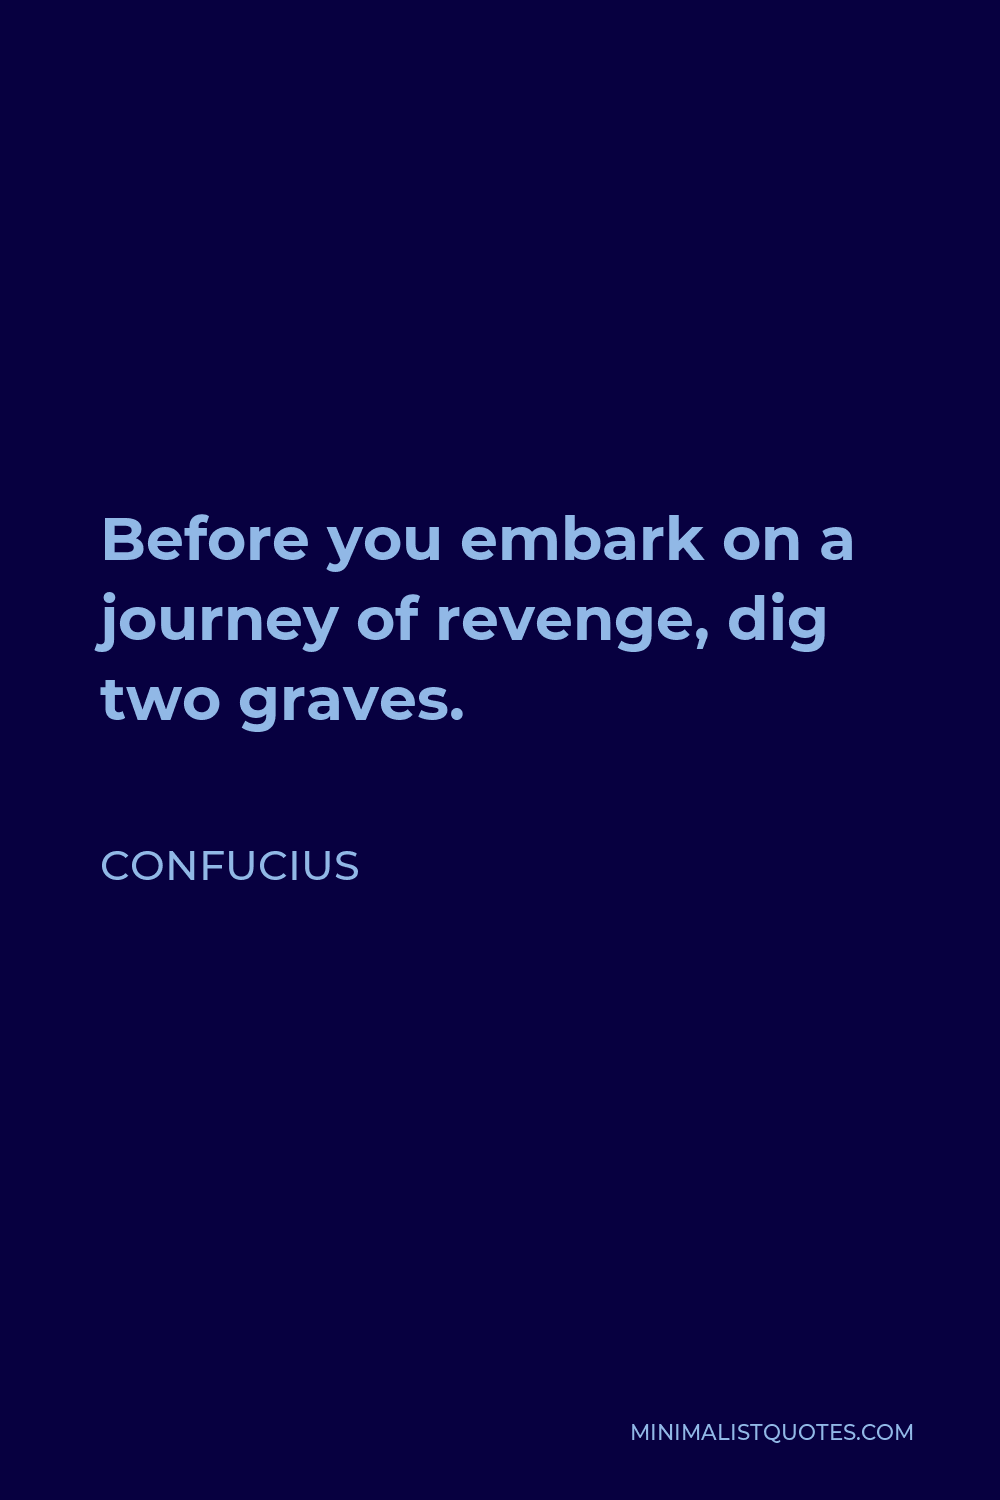 Confucius Quote - Before you embark on a journey of revenge, dig two graves.